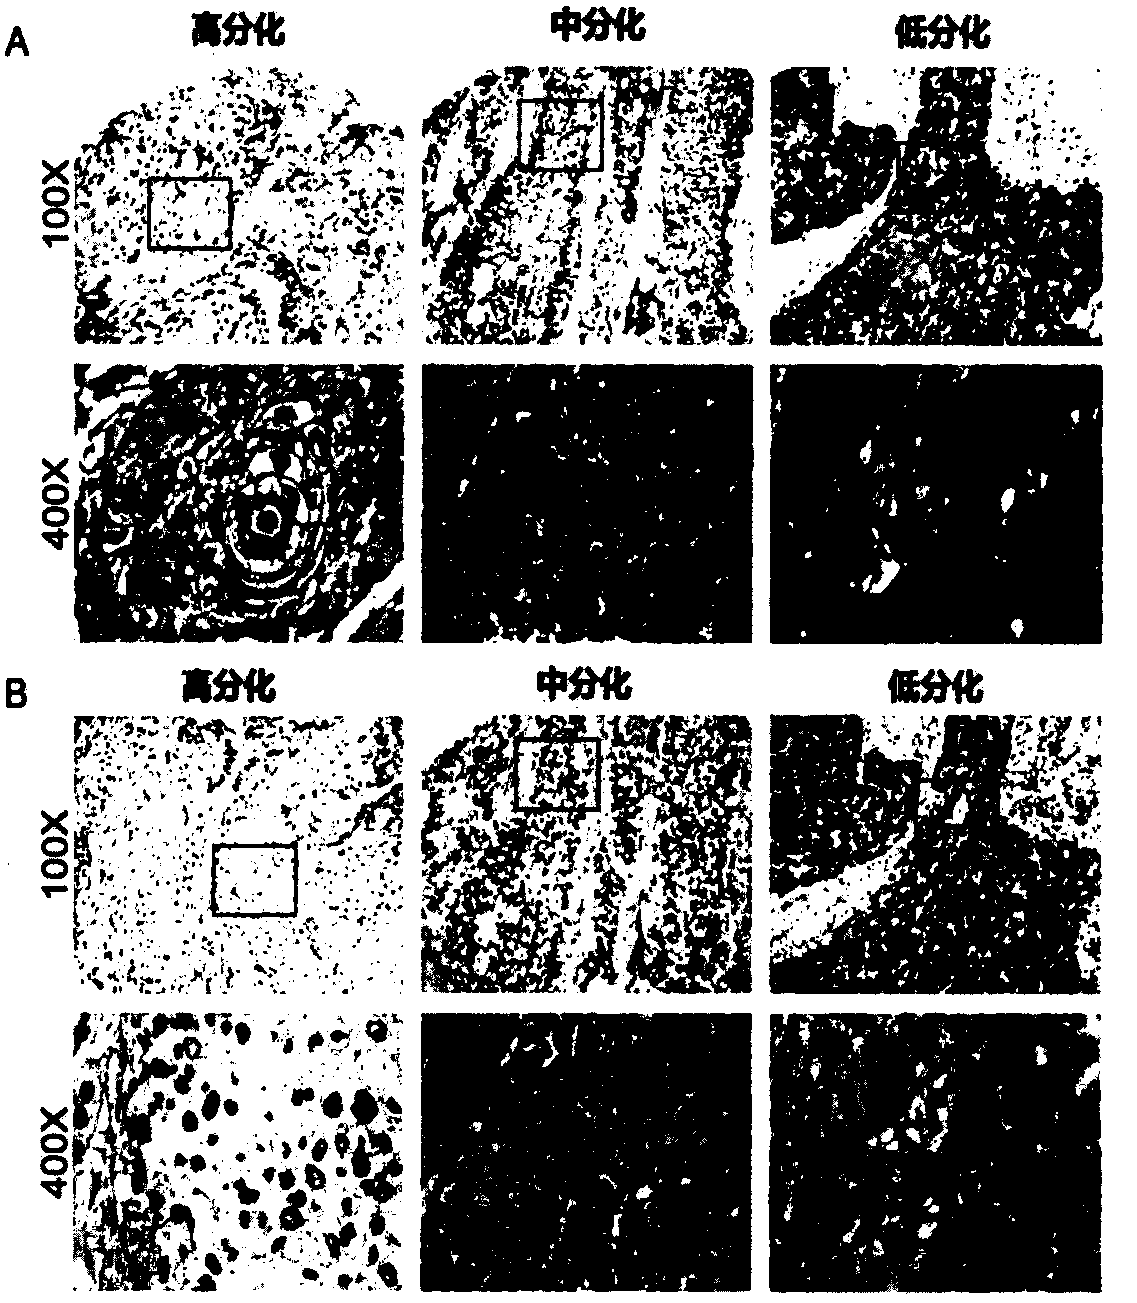 Application of NFI transcription factors in esophageal squamous cell carcinoma